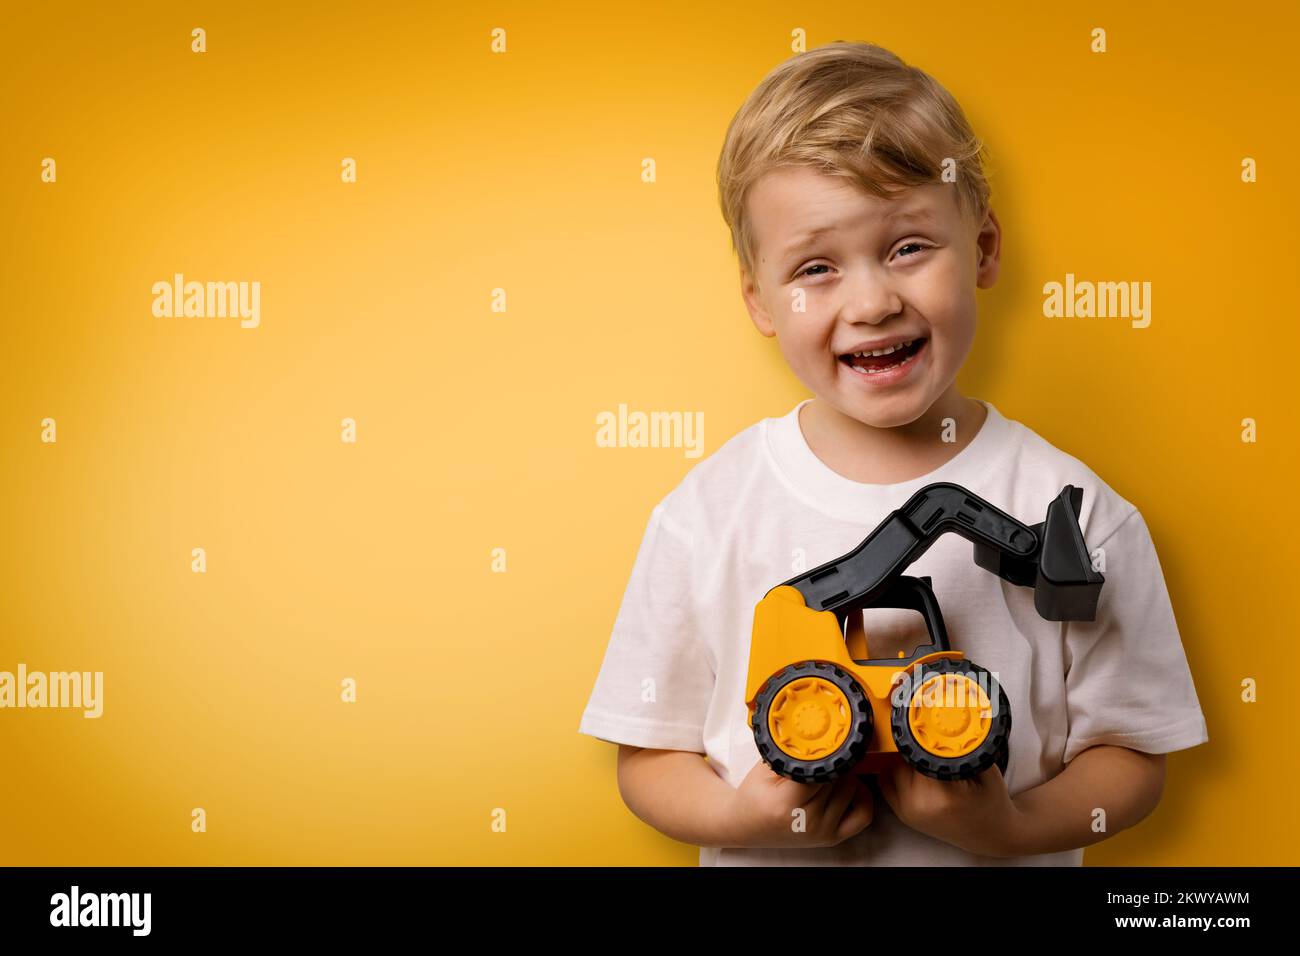 little smiling boy with toy tractor in hands on yellow background with copy space Stock Photo